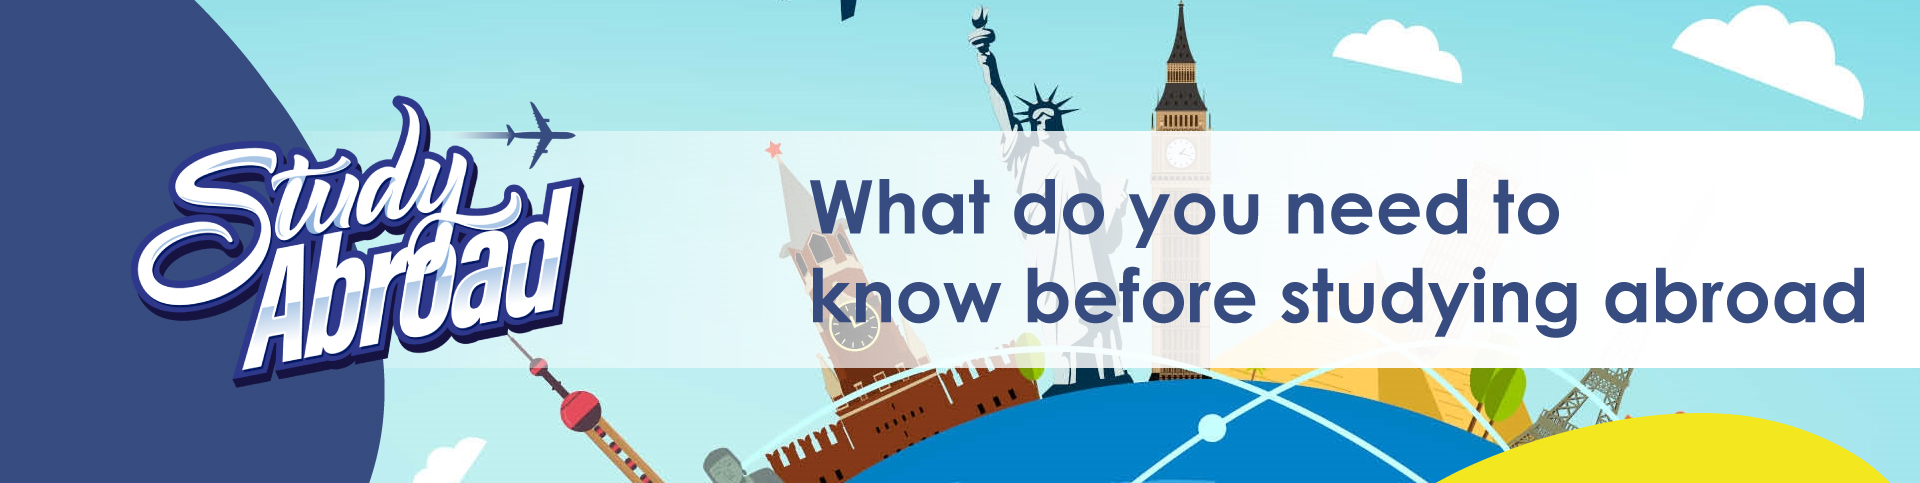 Five Things You Need To Know Before Studying Abroad